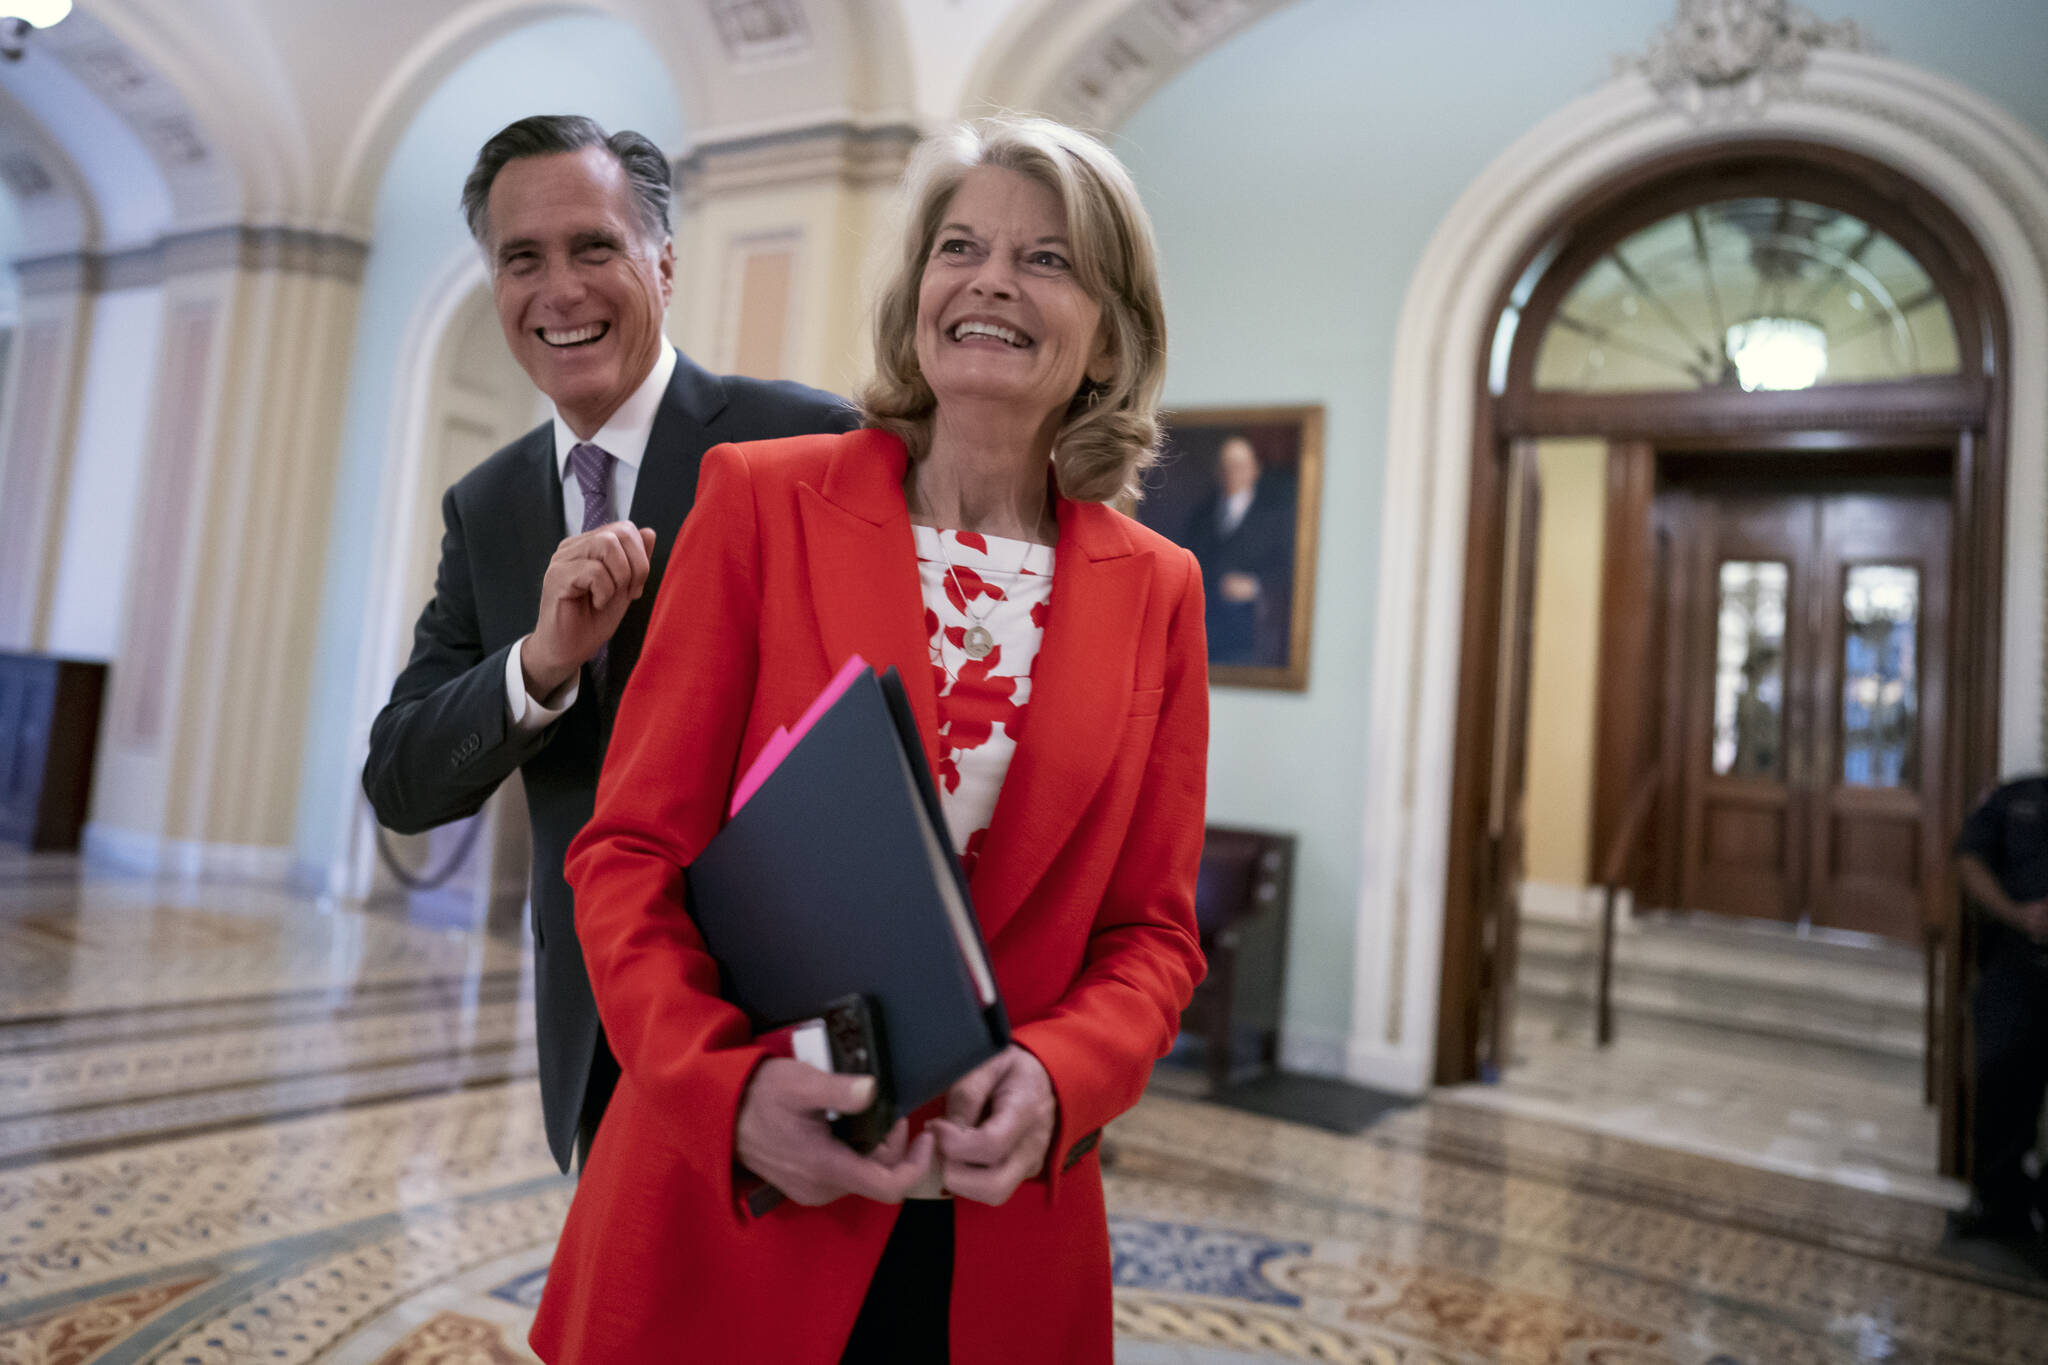 Republican Sens. Lisa Murkowski, of Alaska, and Mitt Romney of Utah, left, who say they will vote to confirm Judge Ketanji Brown Jackson’s historic nomination to the Supreme Court, smile as they greet each other outside the chamber, at the Capitol in Washington, Tuesday, April 5, 2022. Murkowski continues to have a substantial cash advantage over her opponent backed by former President Donald Trump, who has vowed revenge on the incumbent Alaska Republican. Murkowski brought in more than $1.5 million in the three-month period ending March 31, 2022, according to Federal Election Commission filings. (AP Photo/J. Scott Applewhite, File)